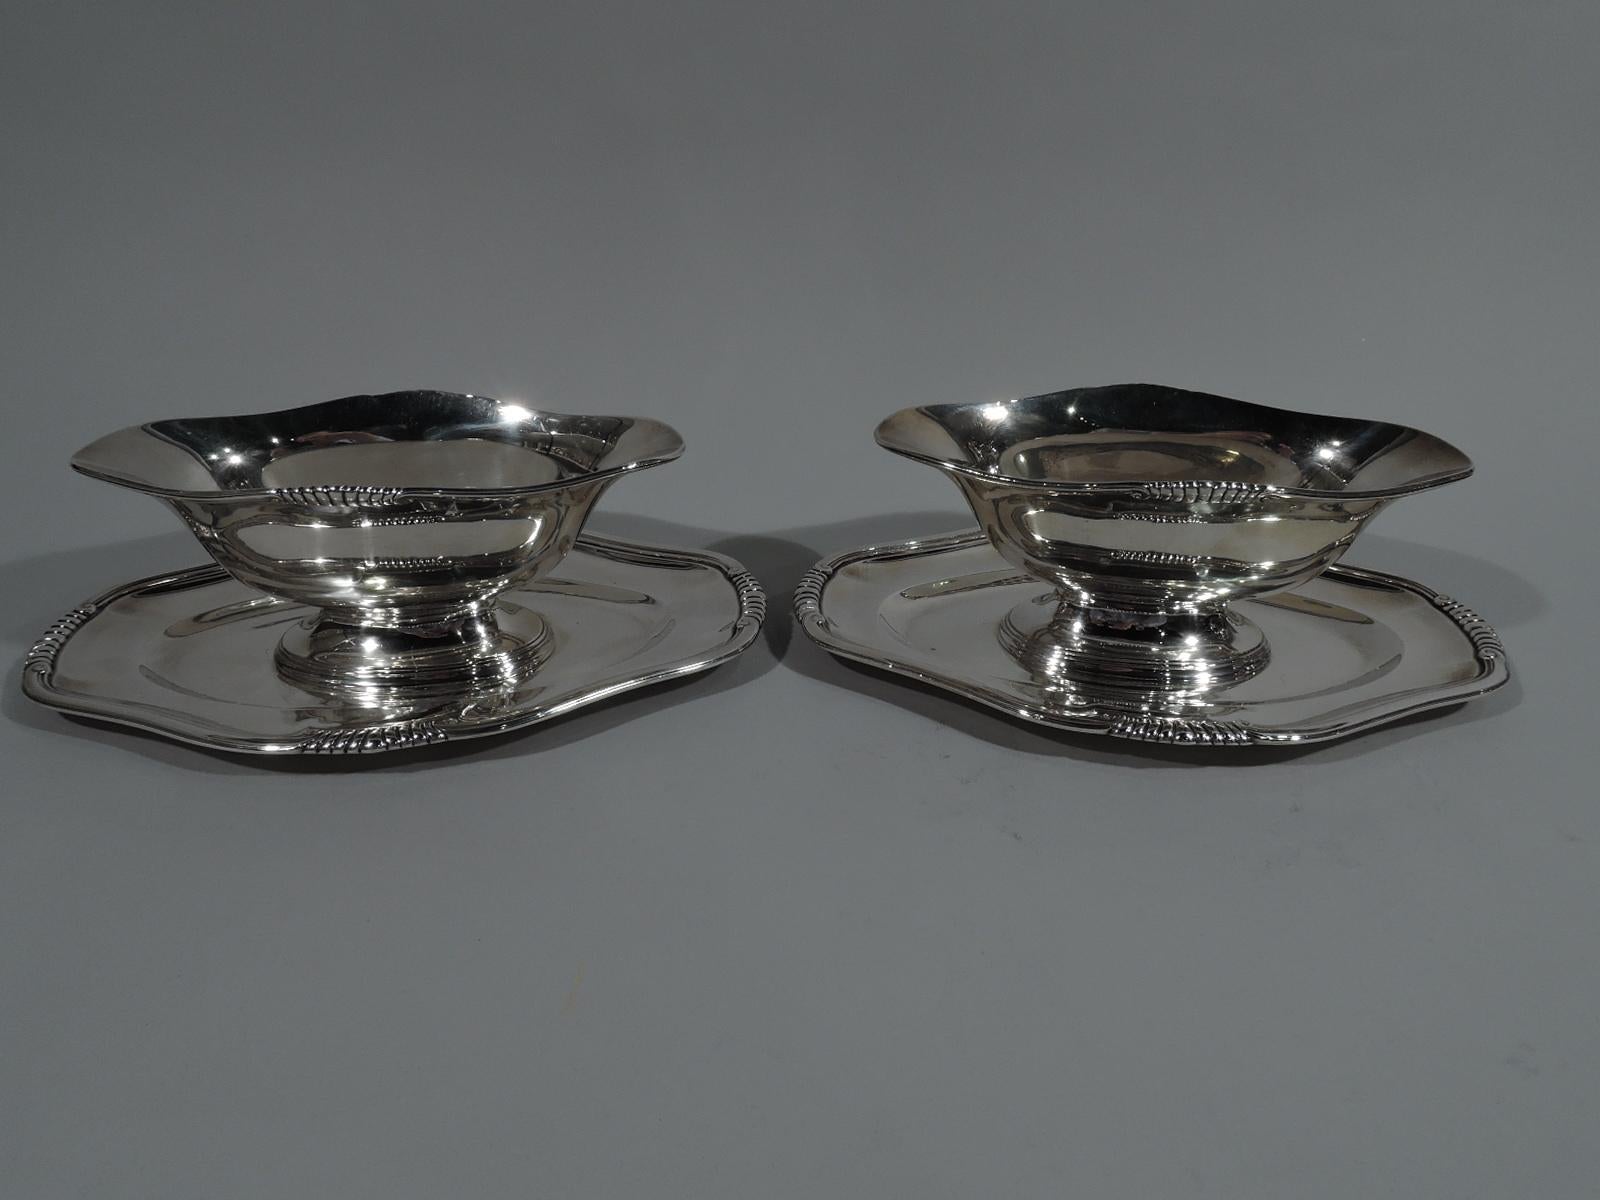 Pair of French 950 silver Classical gravy boats on stands, circa 1910. Each: Boat has tapering ends, curved and tapering bowl, and stepped oval foot mounted to shaped stand with oval well. Scrolled and gadrooned rims. Single letter monogram engraved